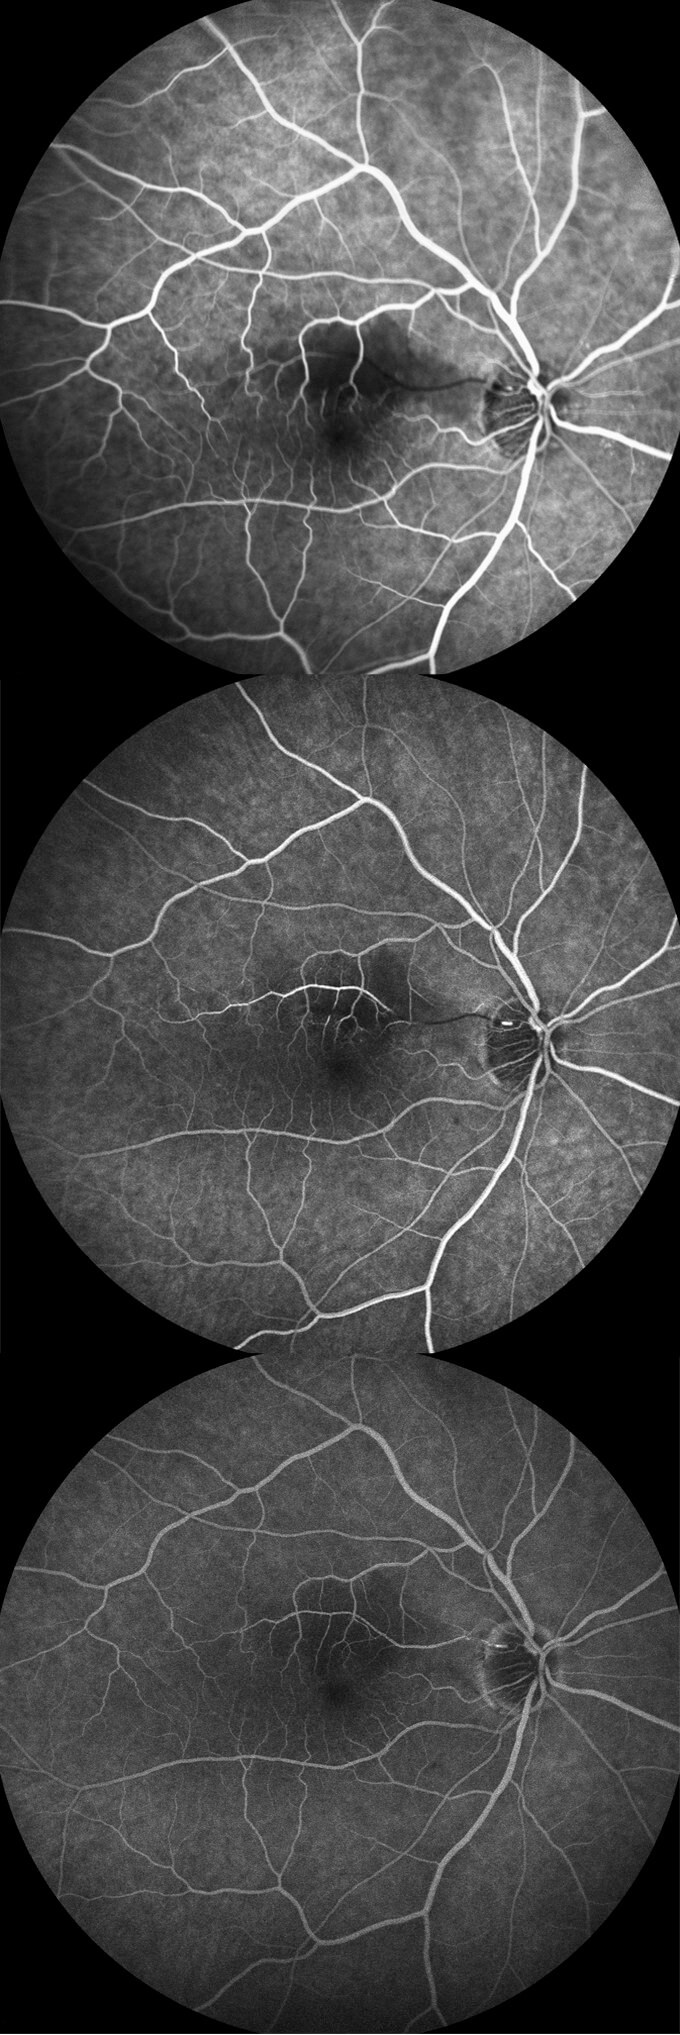 Fluorescein angiography (early to late, top to bottom) shows occlusion of the right cilioretinal artery, which fills with dye from retrograde flow in the late phase.